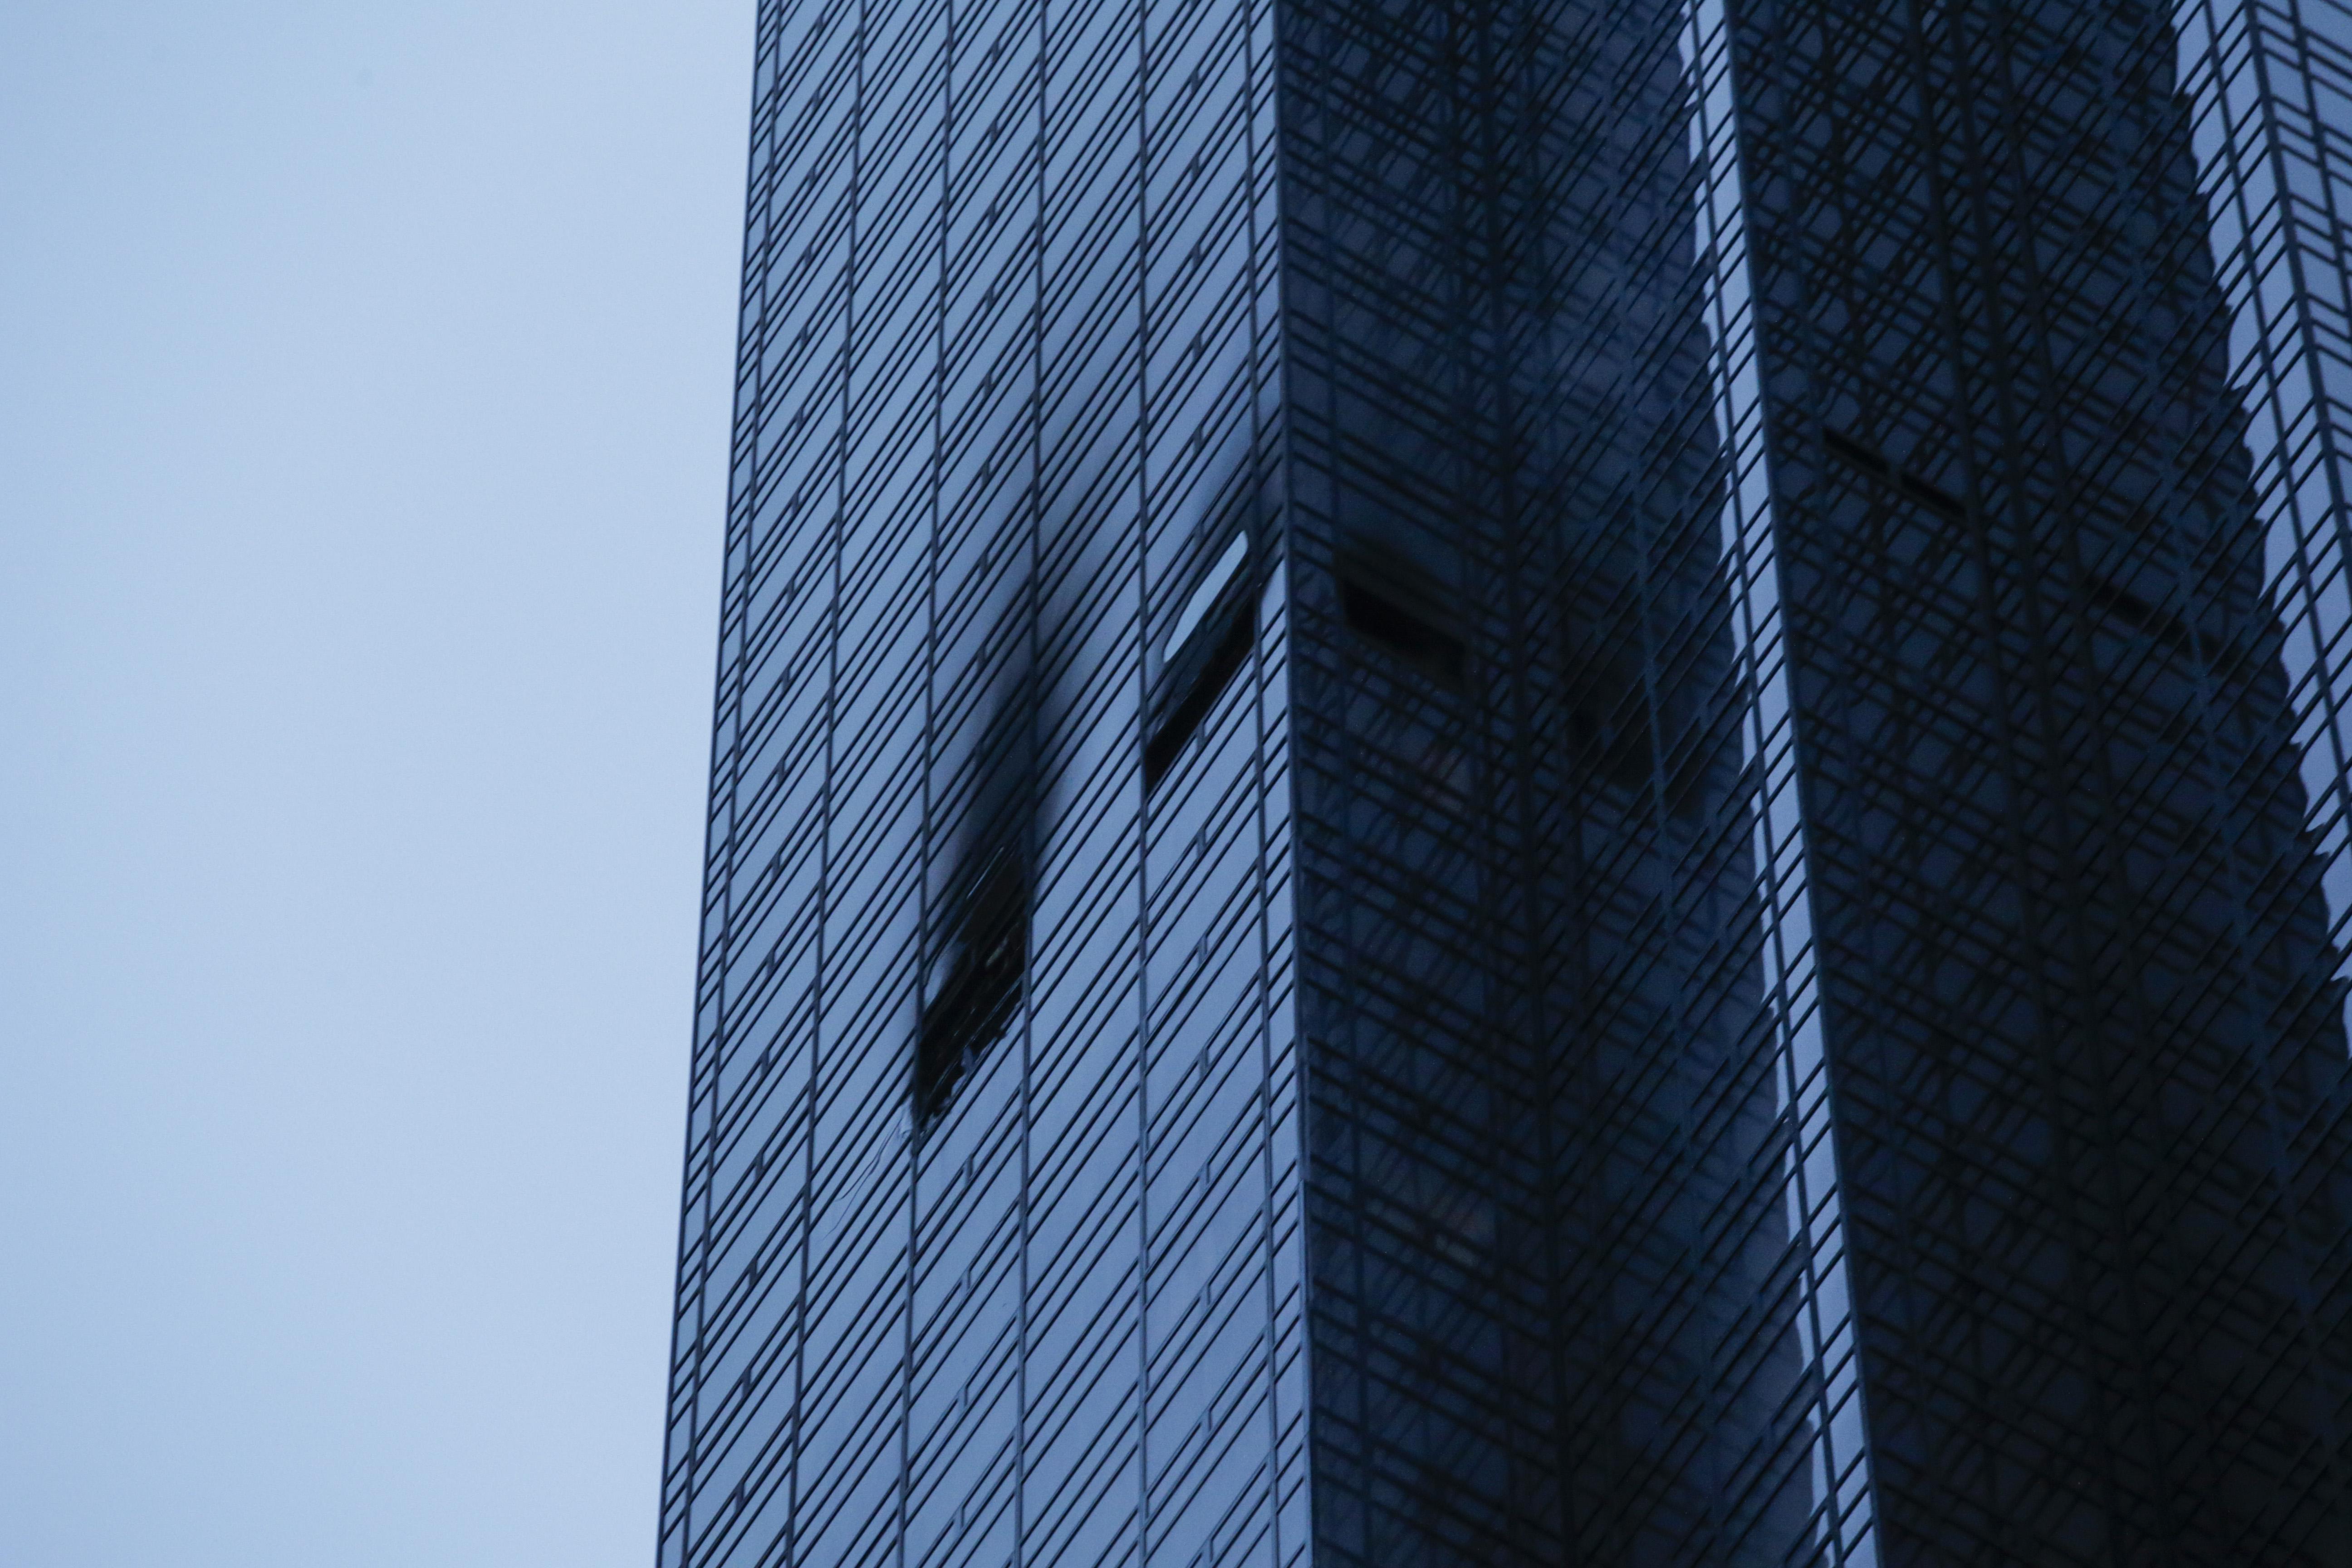 On the side of Trump Tower, two windows are burnt and broken.